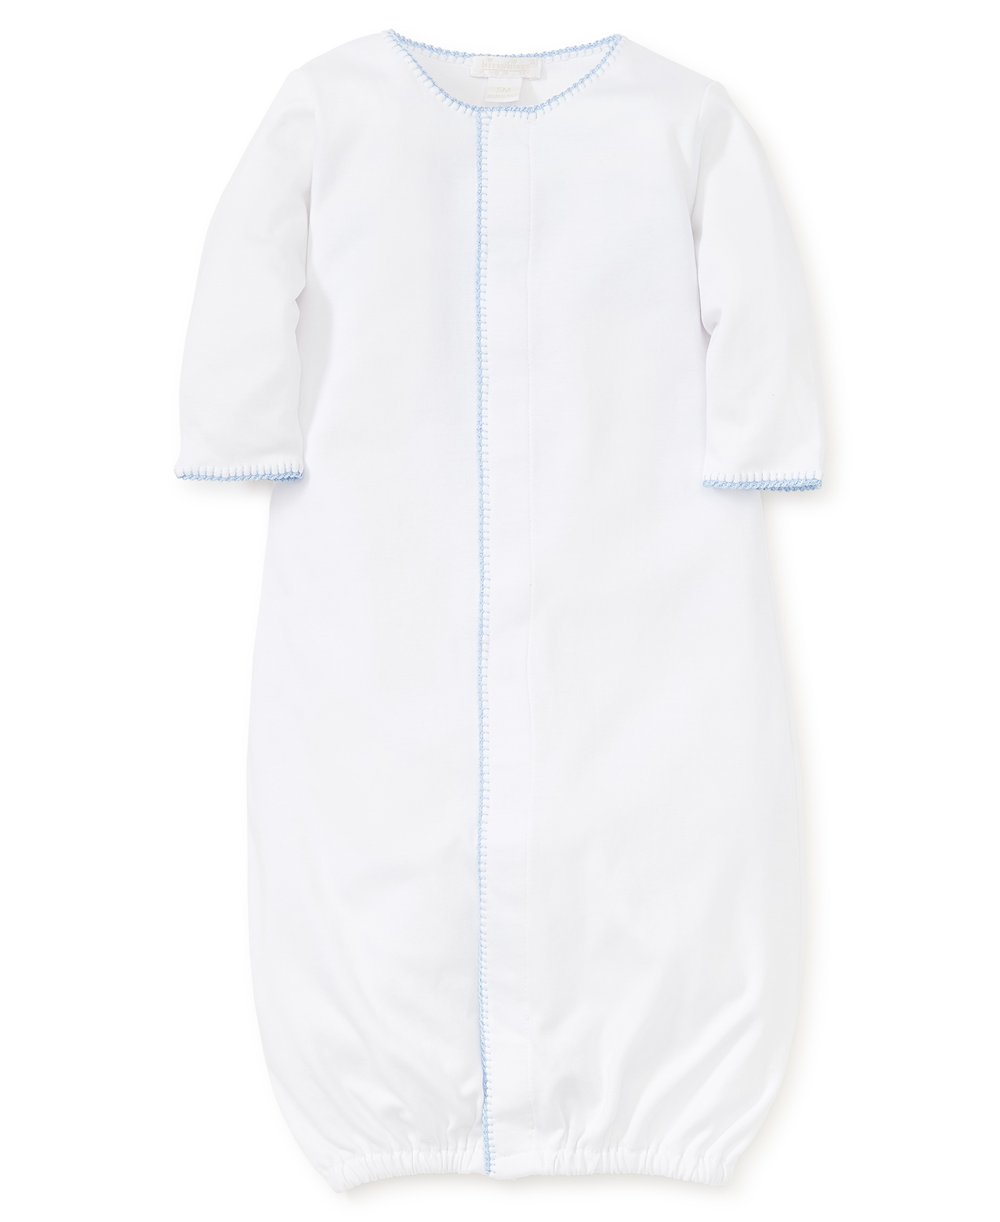 New Premier Basics Converter Gown - White with Blue